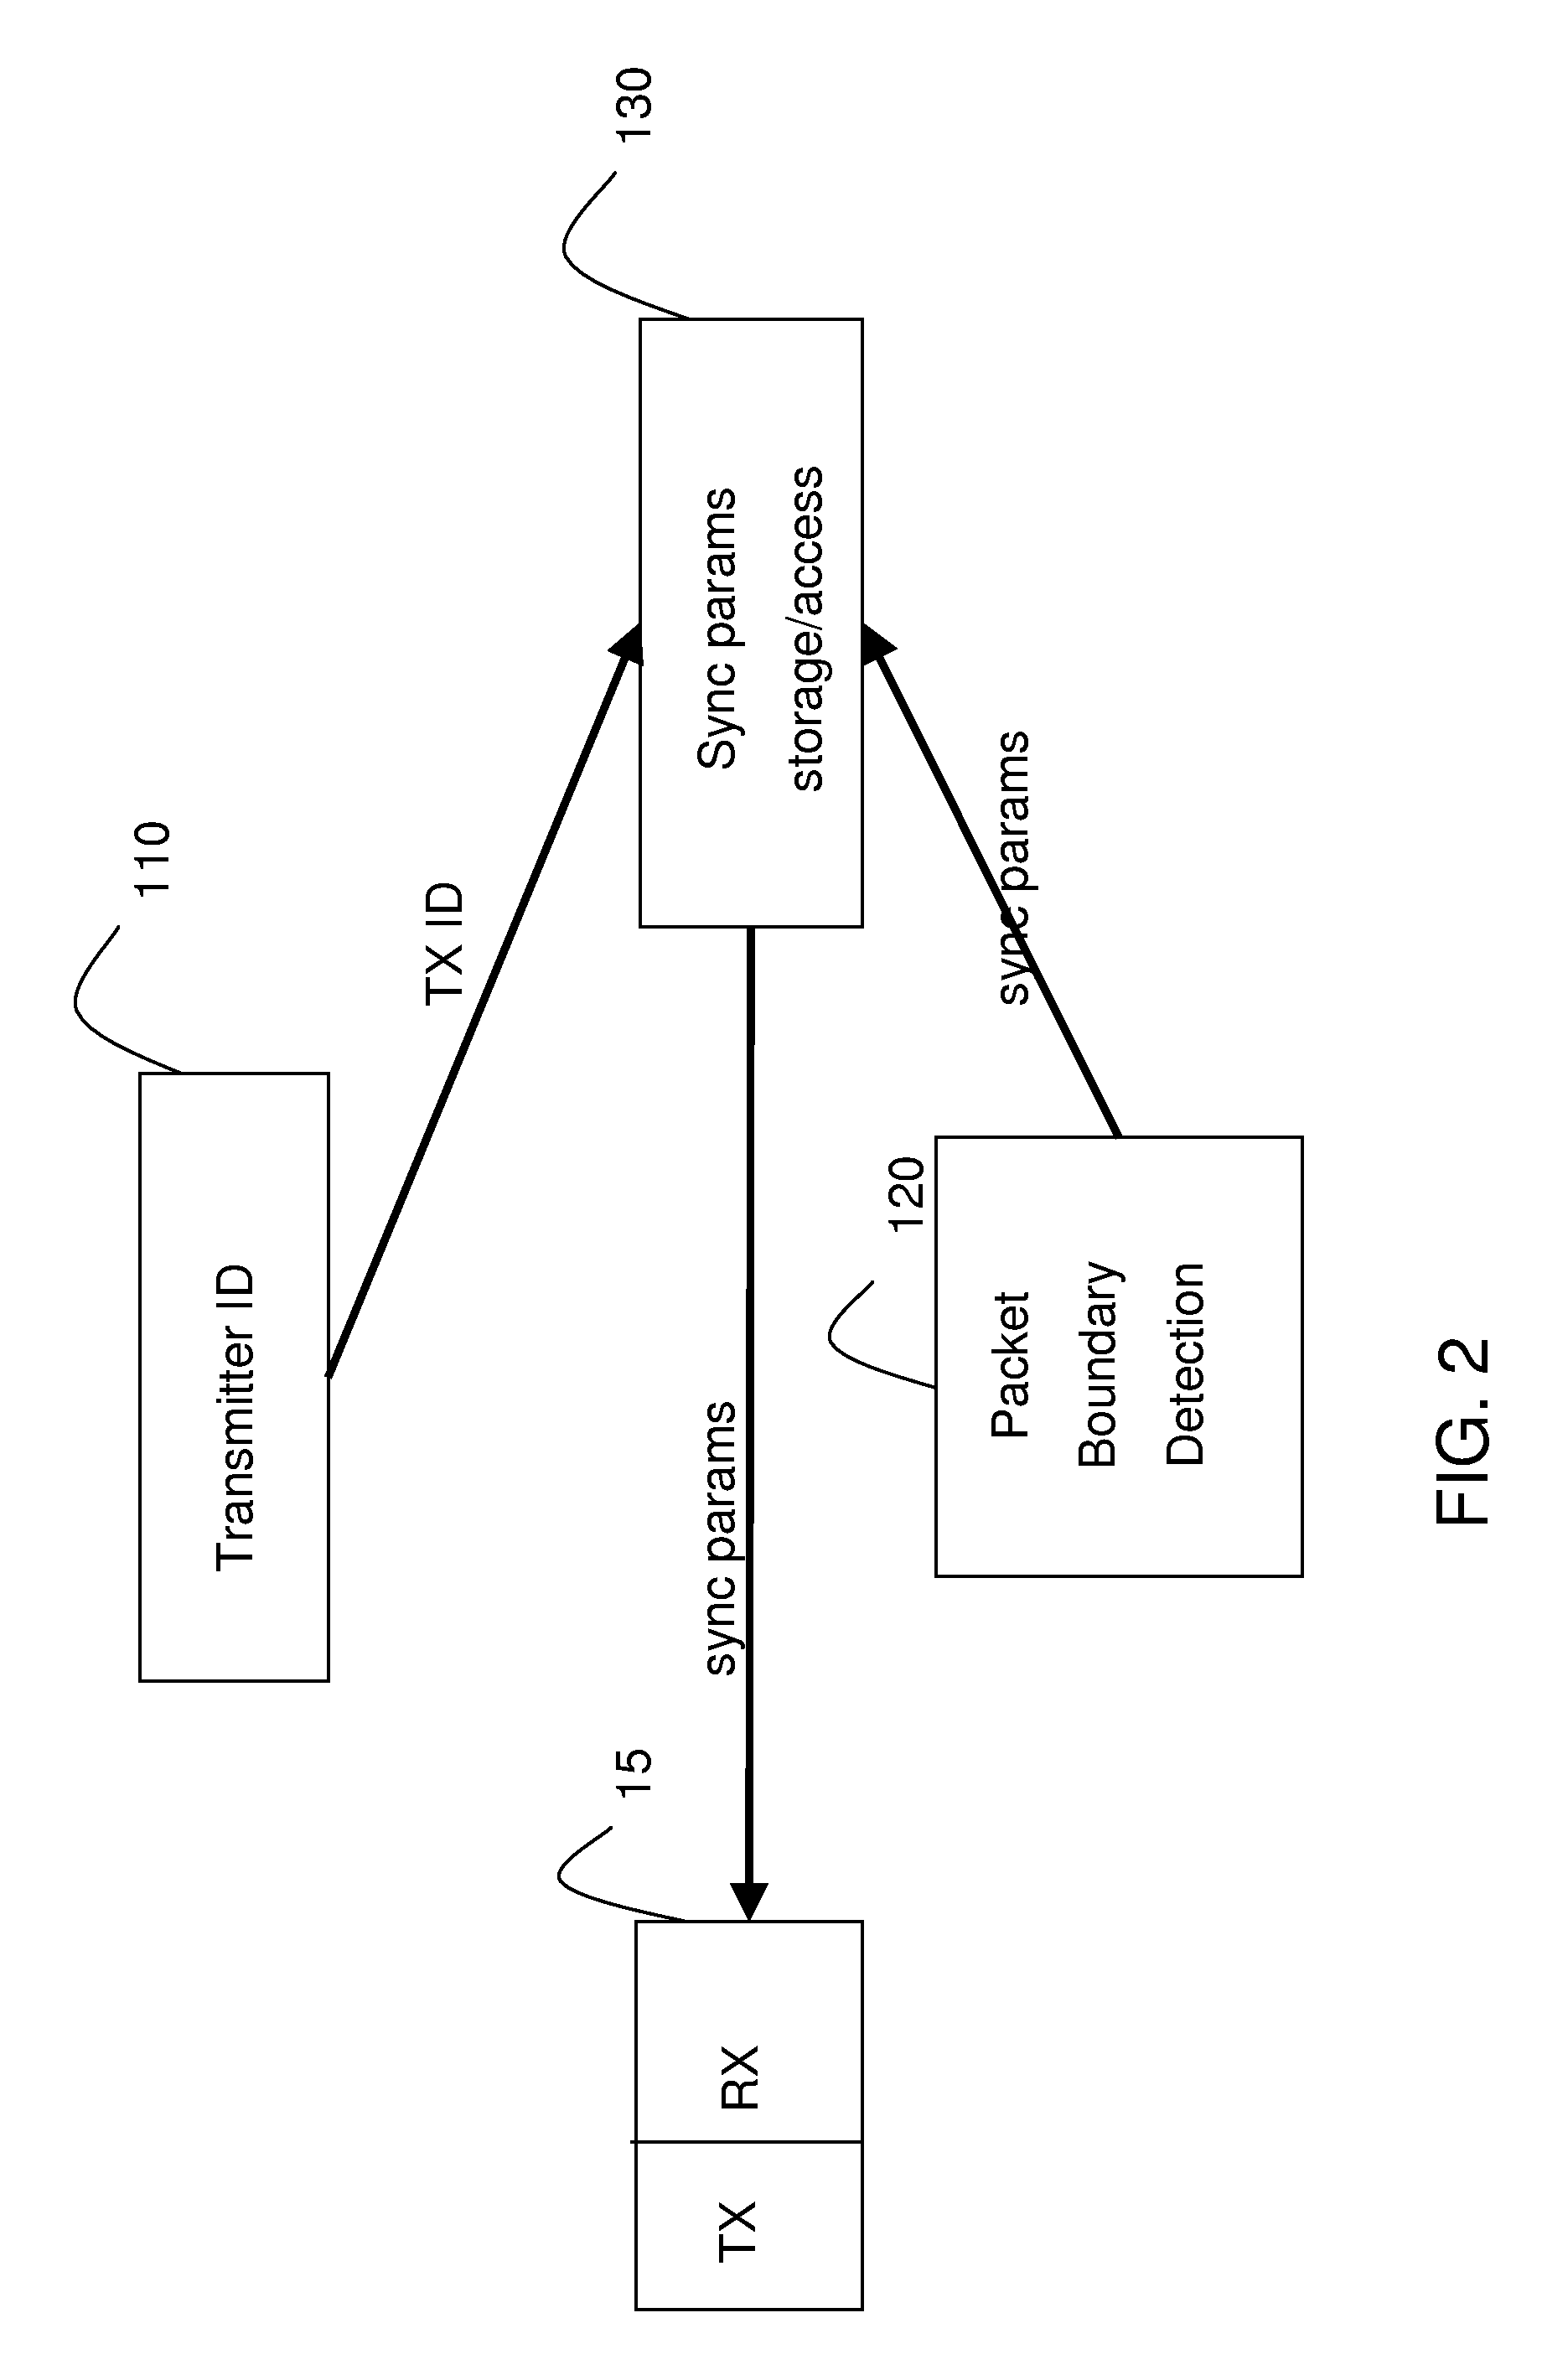 Packet-switched network synchronization system and method